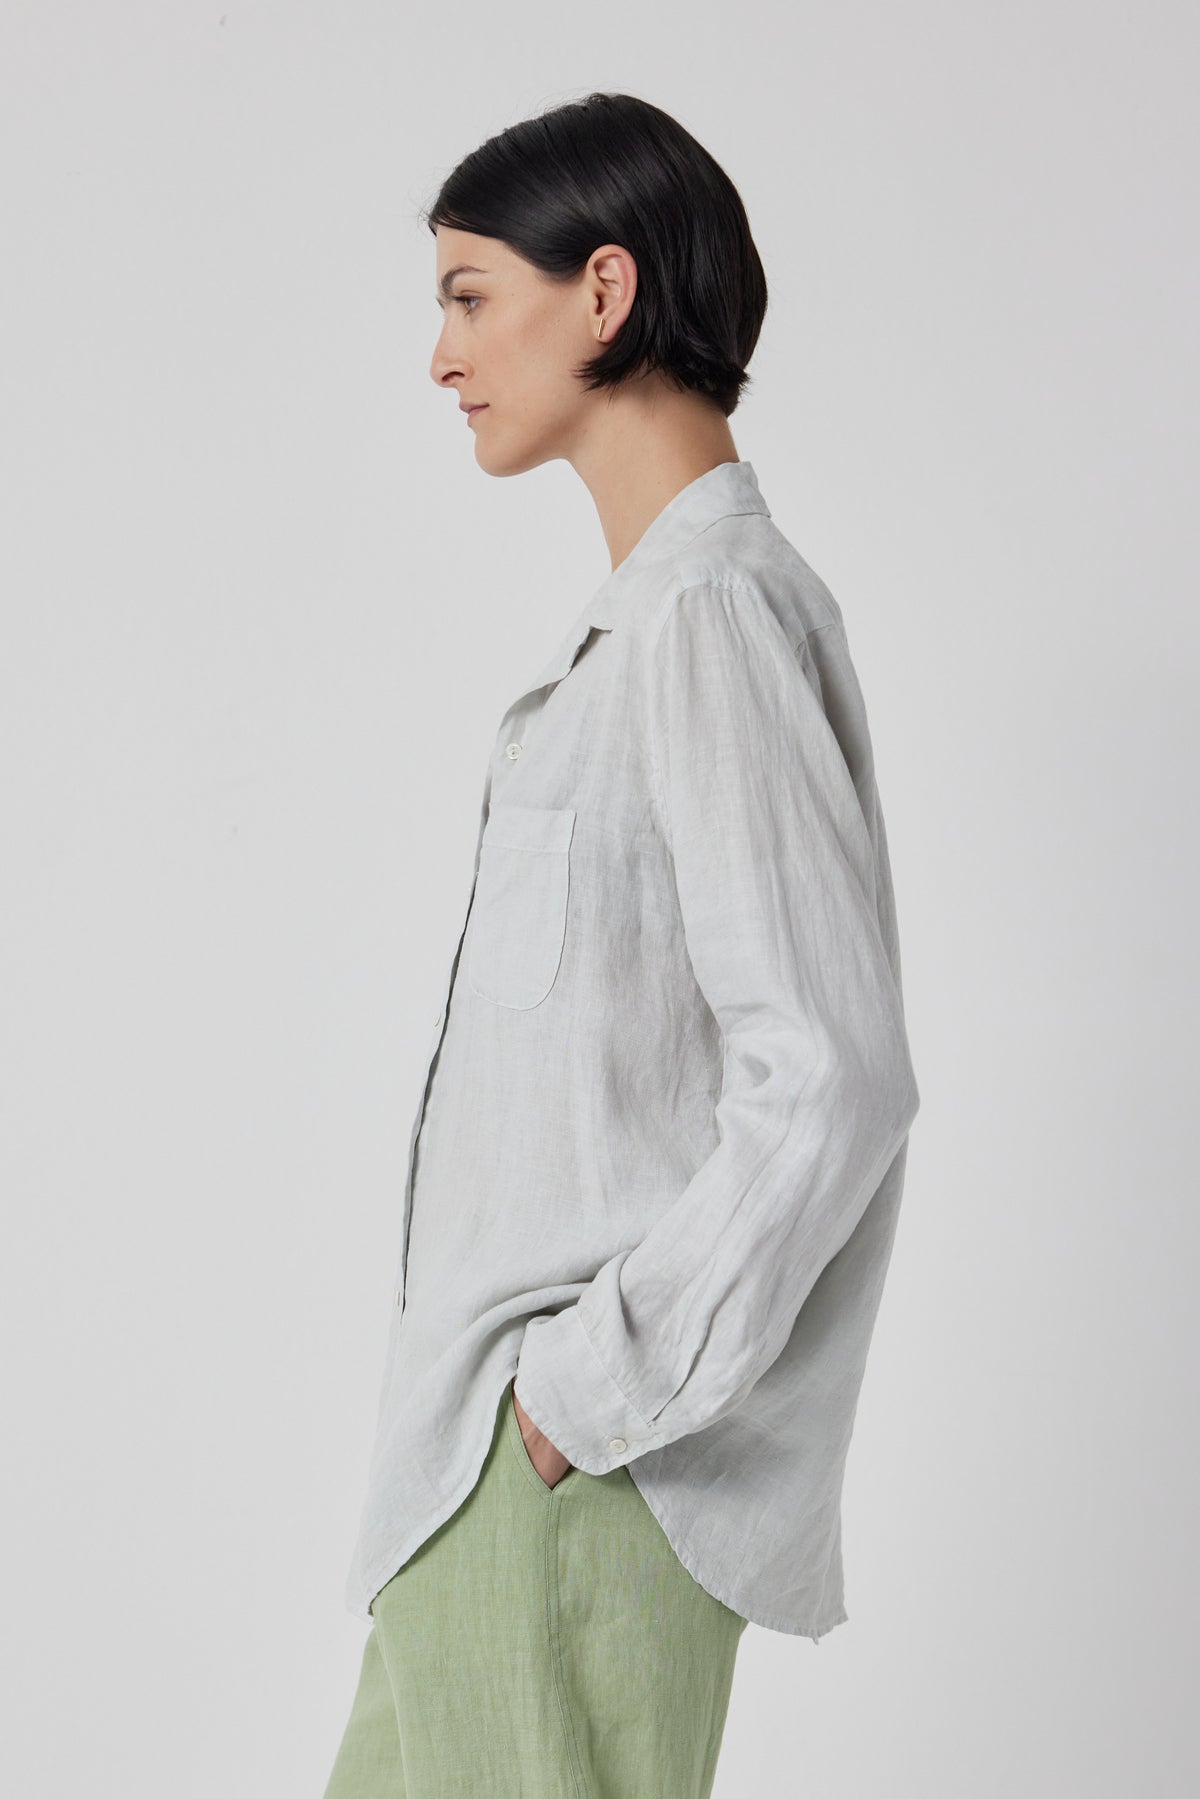 The model is wearing a grey Velvet by Jenny Graham linen button up shirt and green pants.-36212529725633